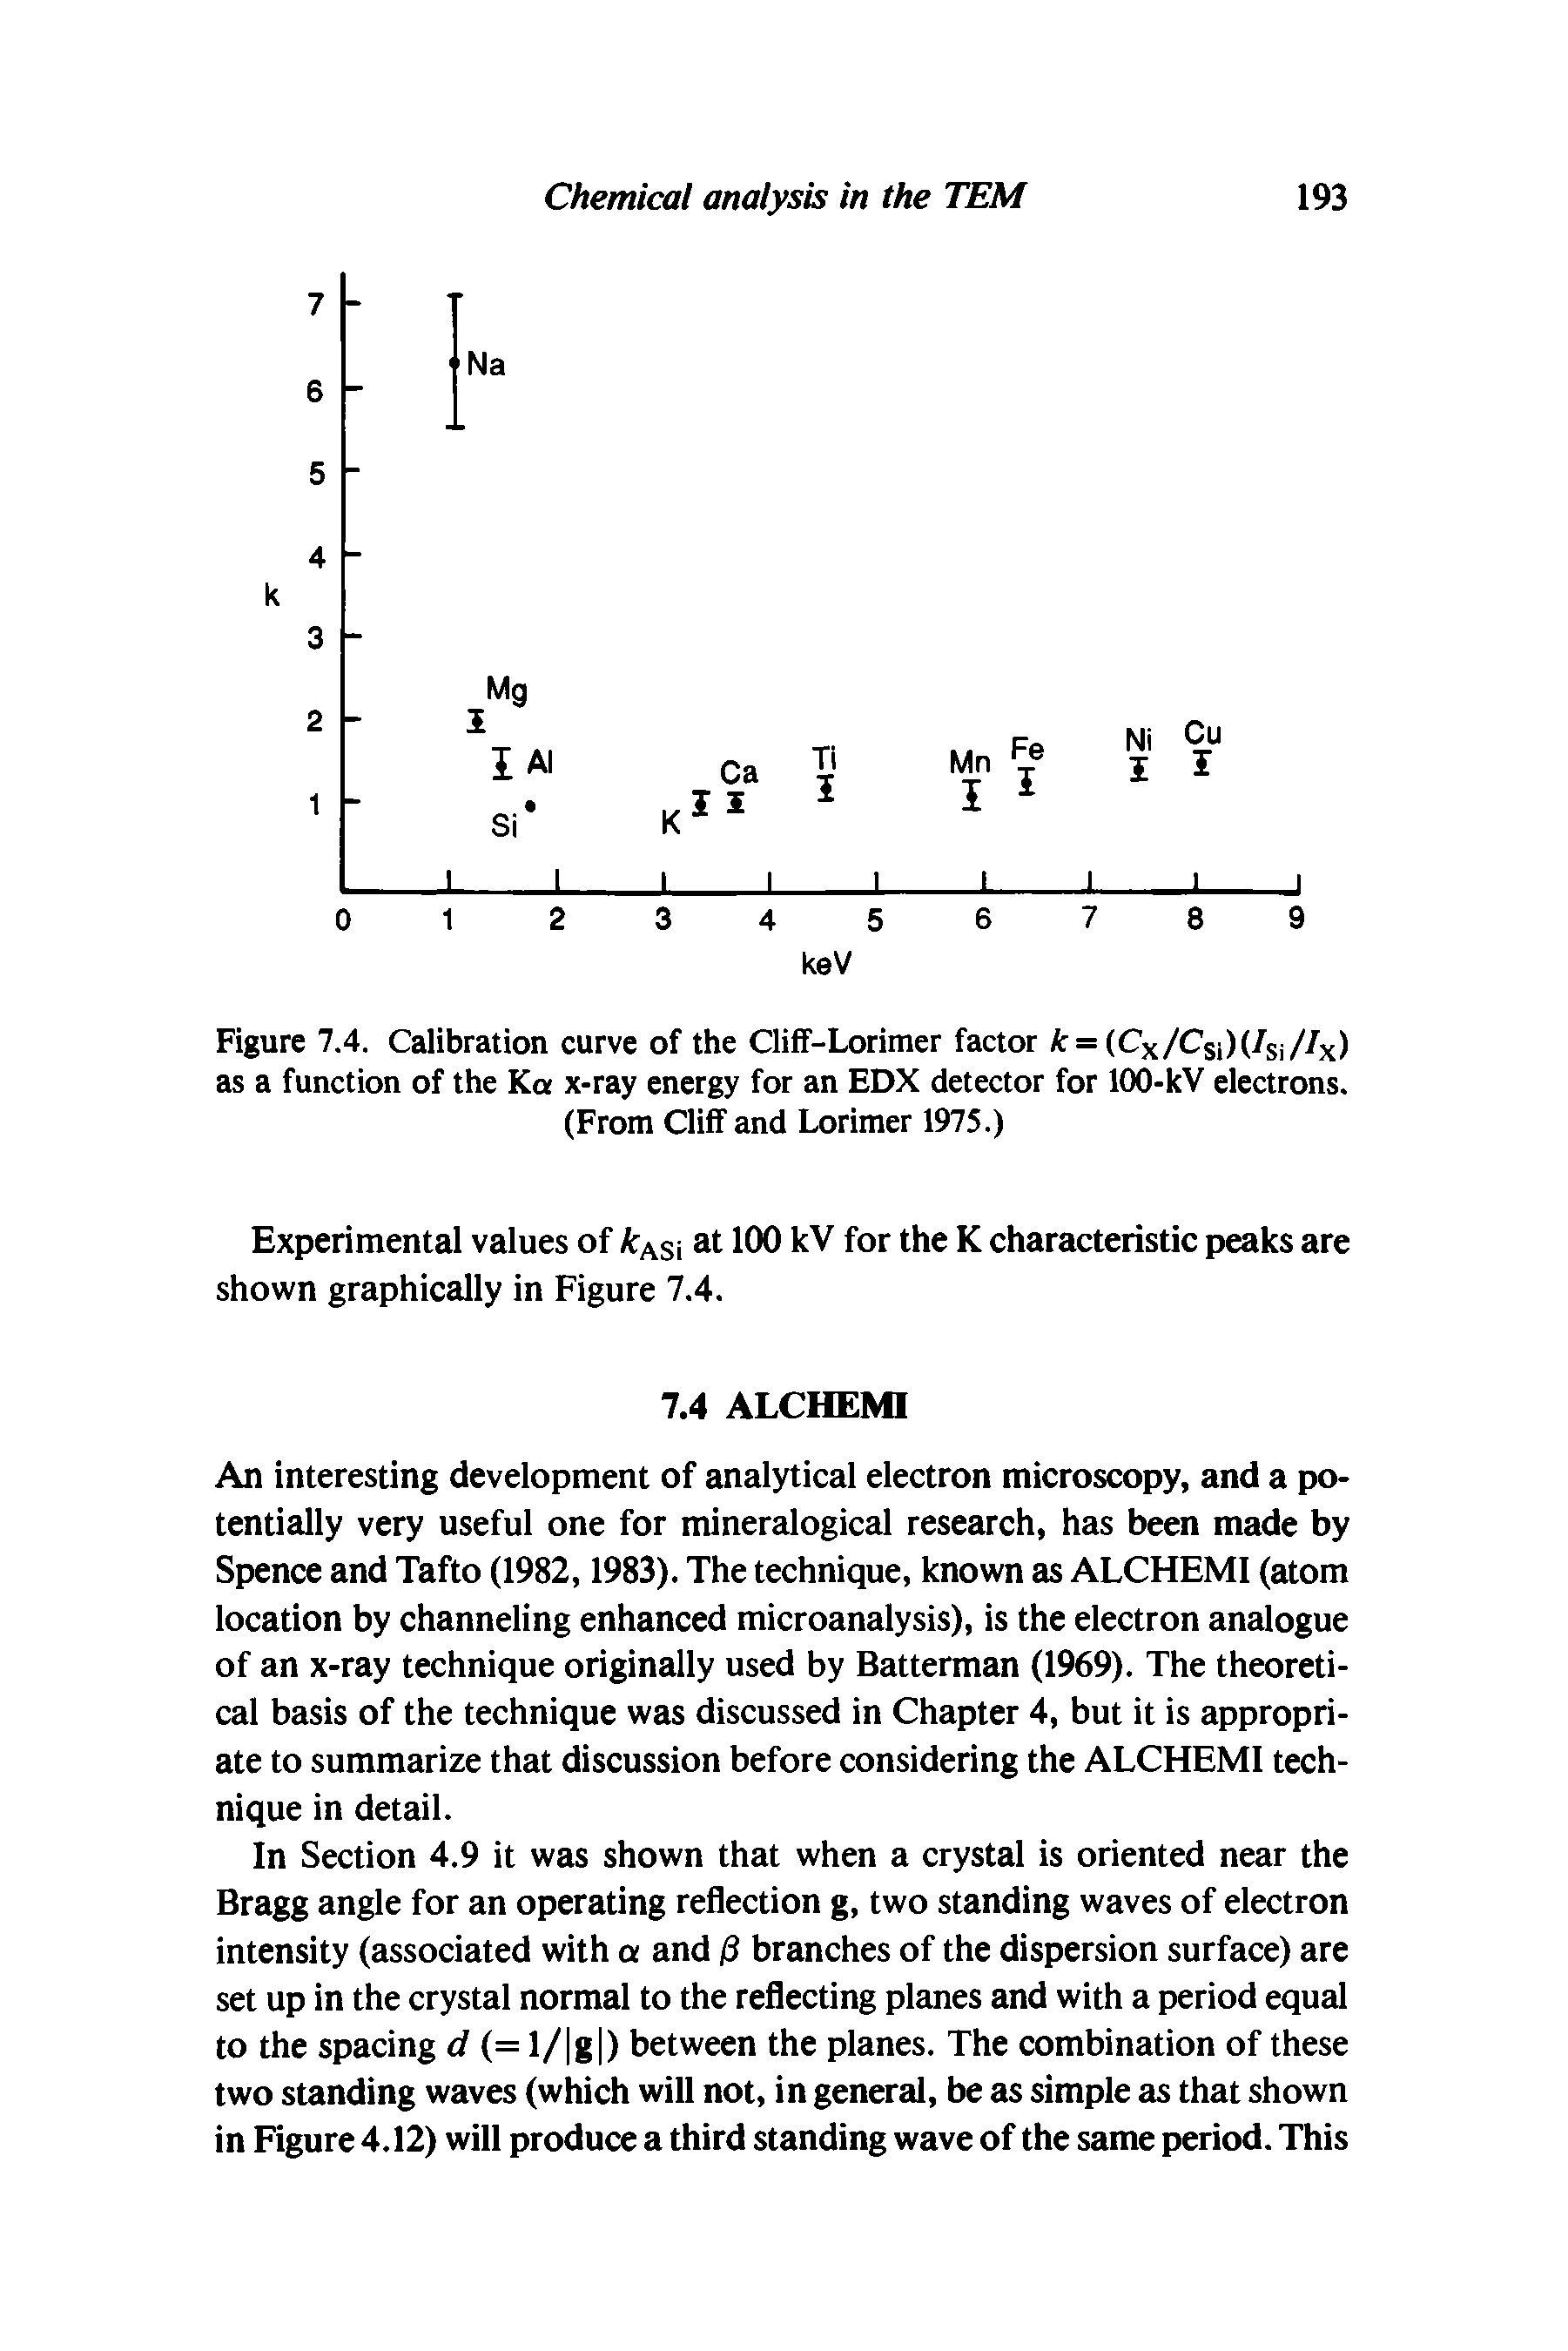 Figure 7.4. Calibration curve of the Cliff-Lorimer factor = (Cx/Csi)(/si Ax) as a function of the Ka x-ray energy for an EDX detector for lOO-kV electrons. (From Cliff and Lorimer 1975.)...